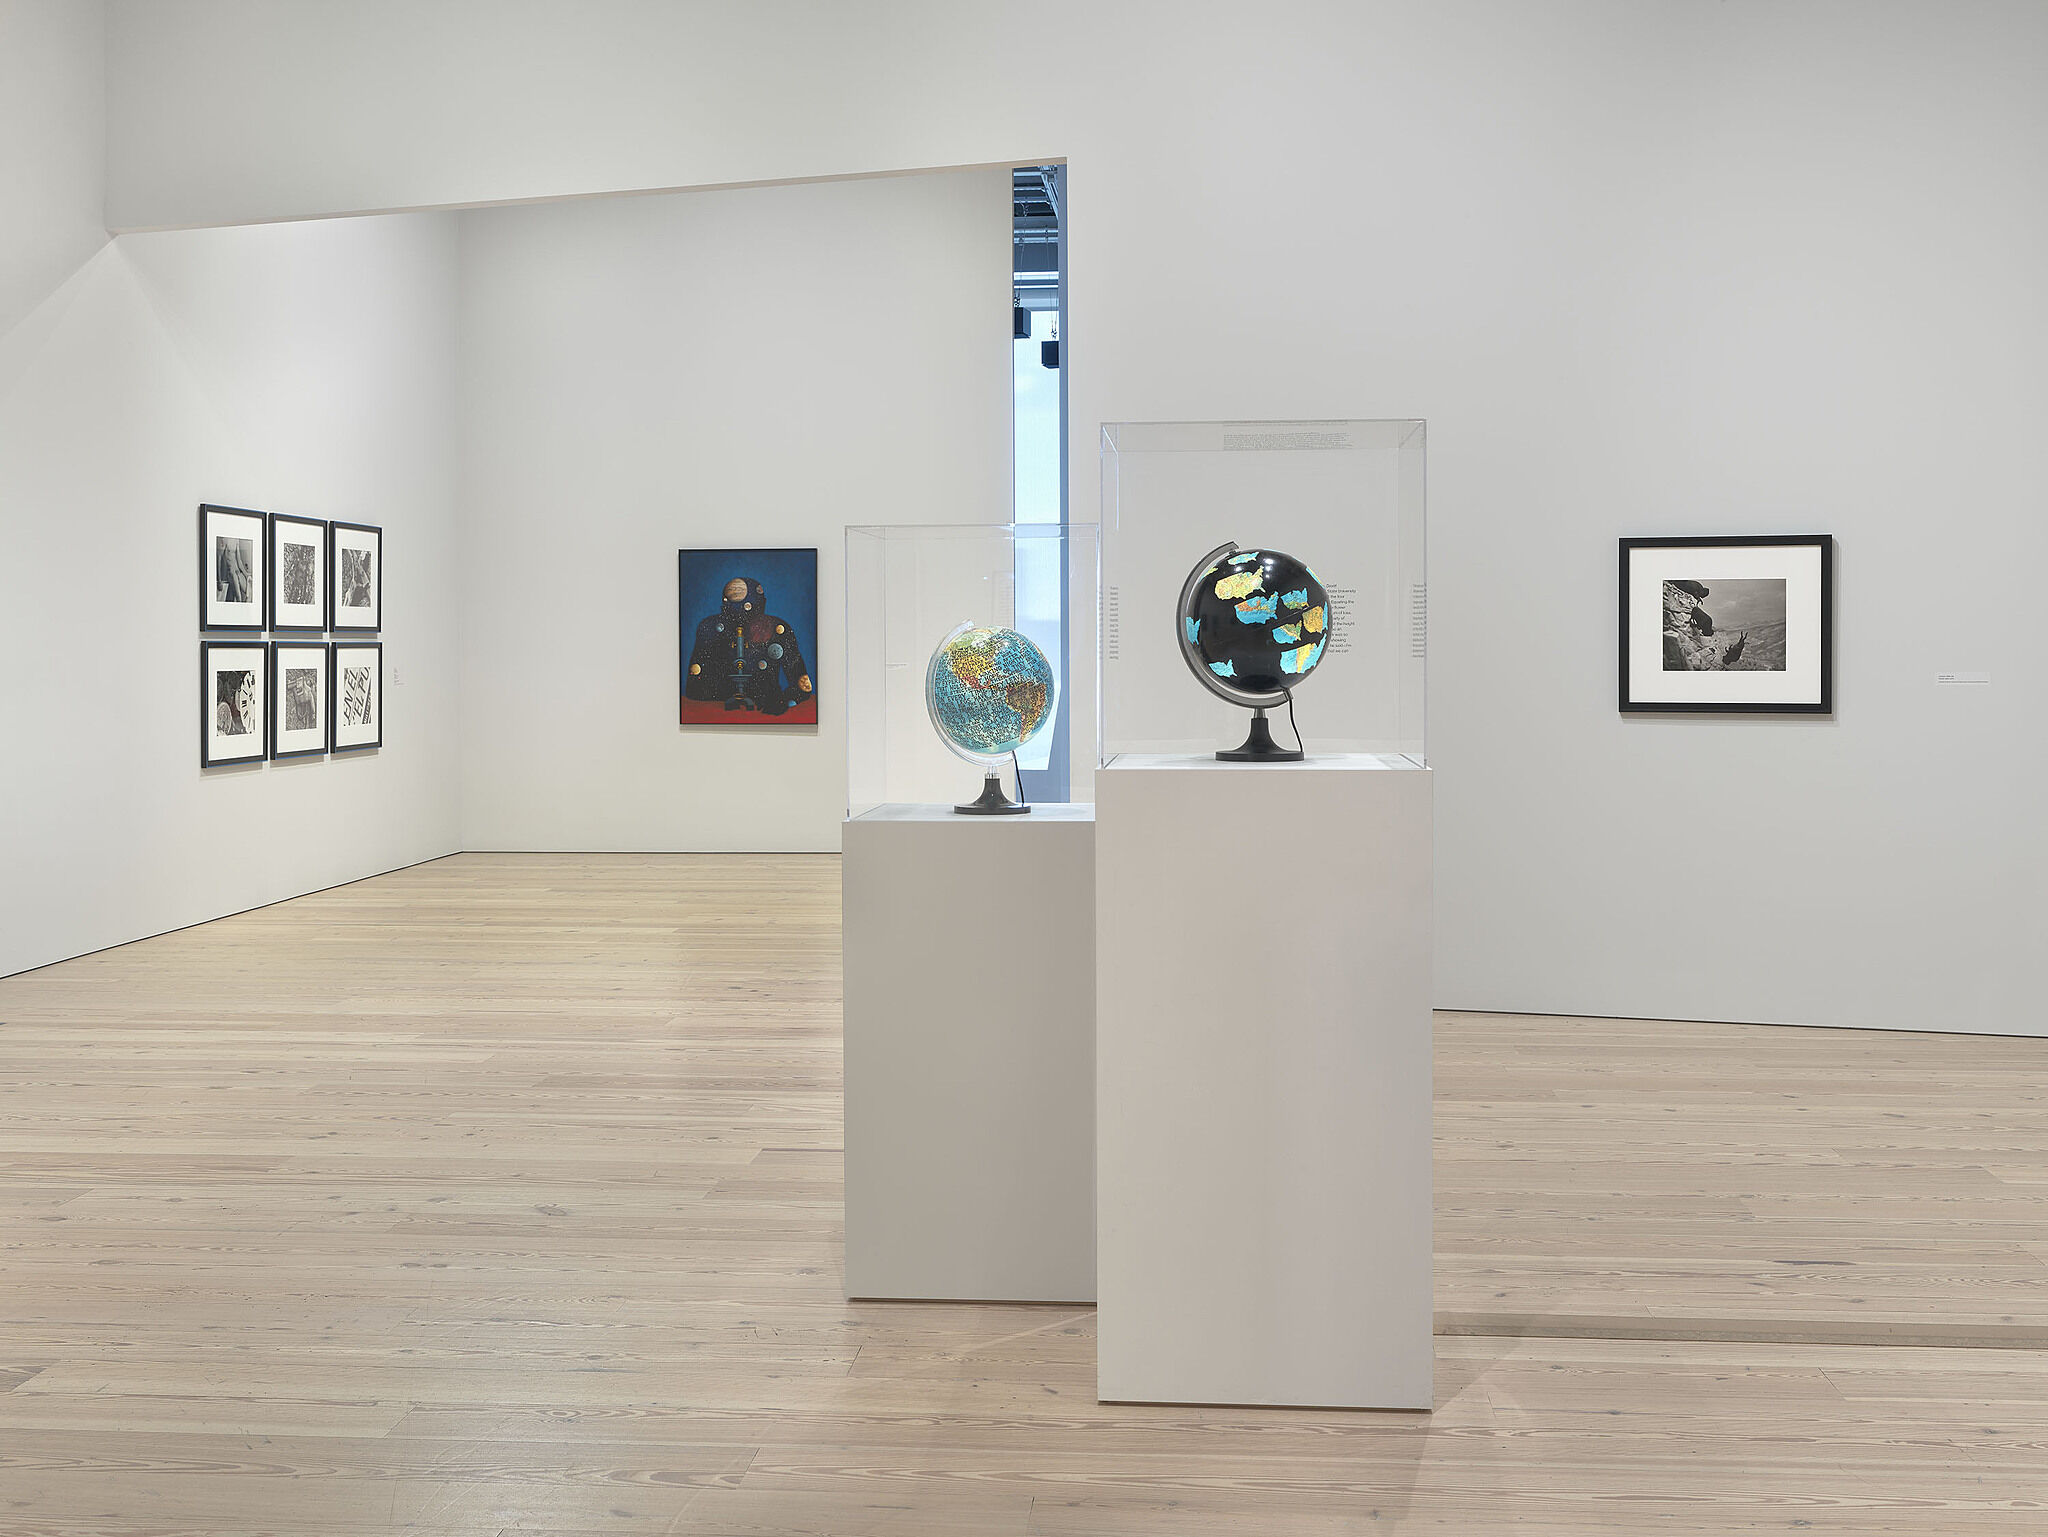 An image of the Whitney galleries with various artworks on the wall